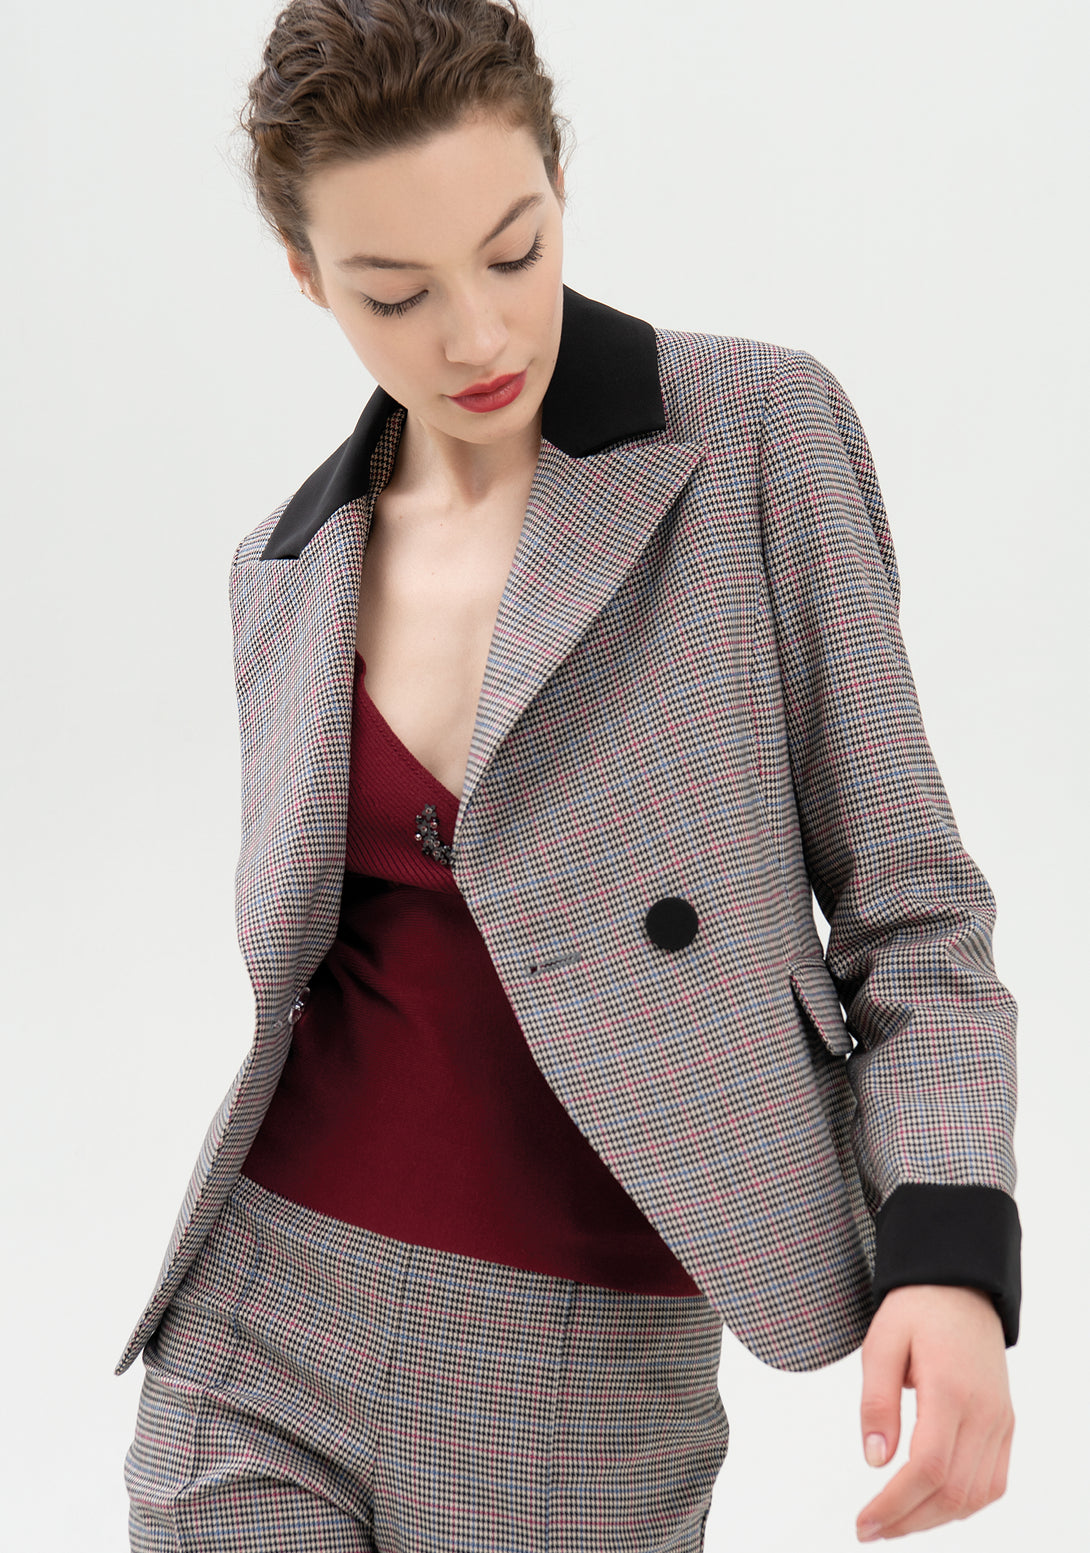 Blazer regular fit double breasted made in pied de poule fabric